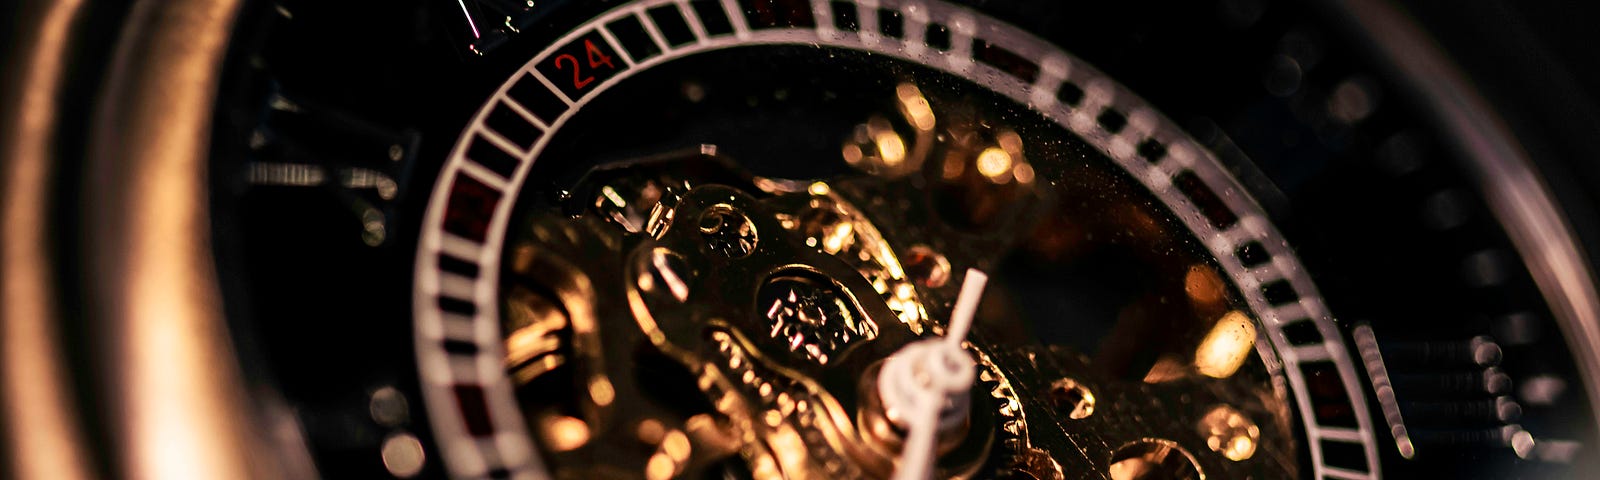 Close-up of a gold watch or clock